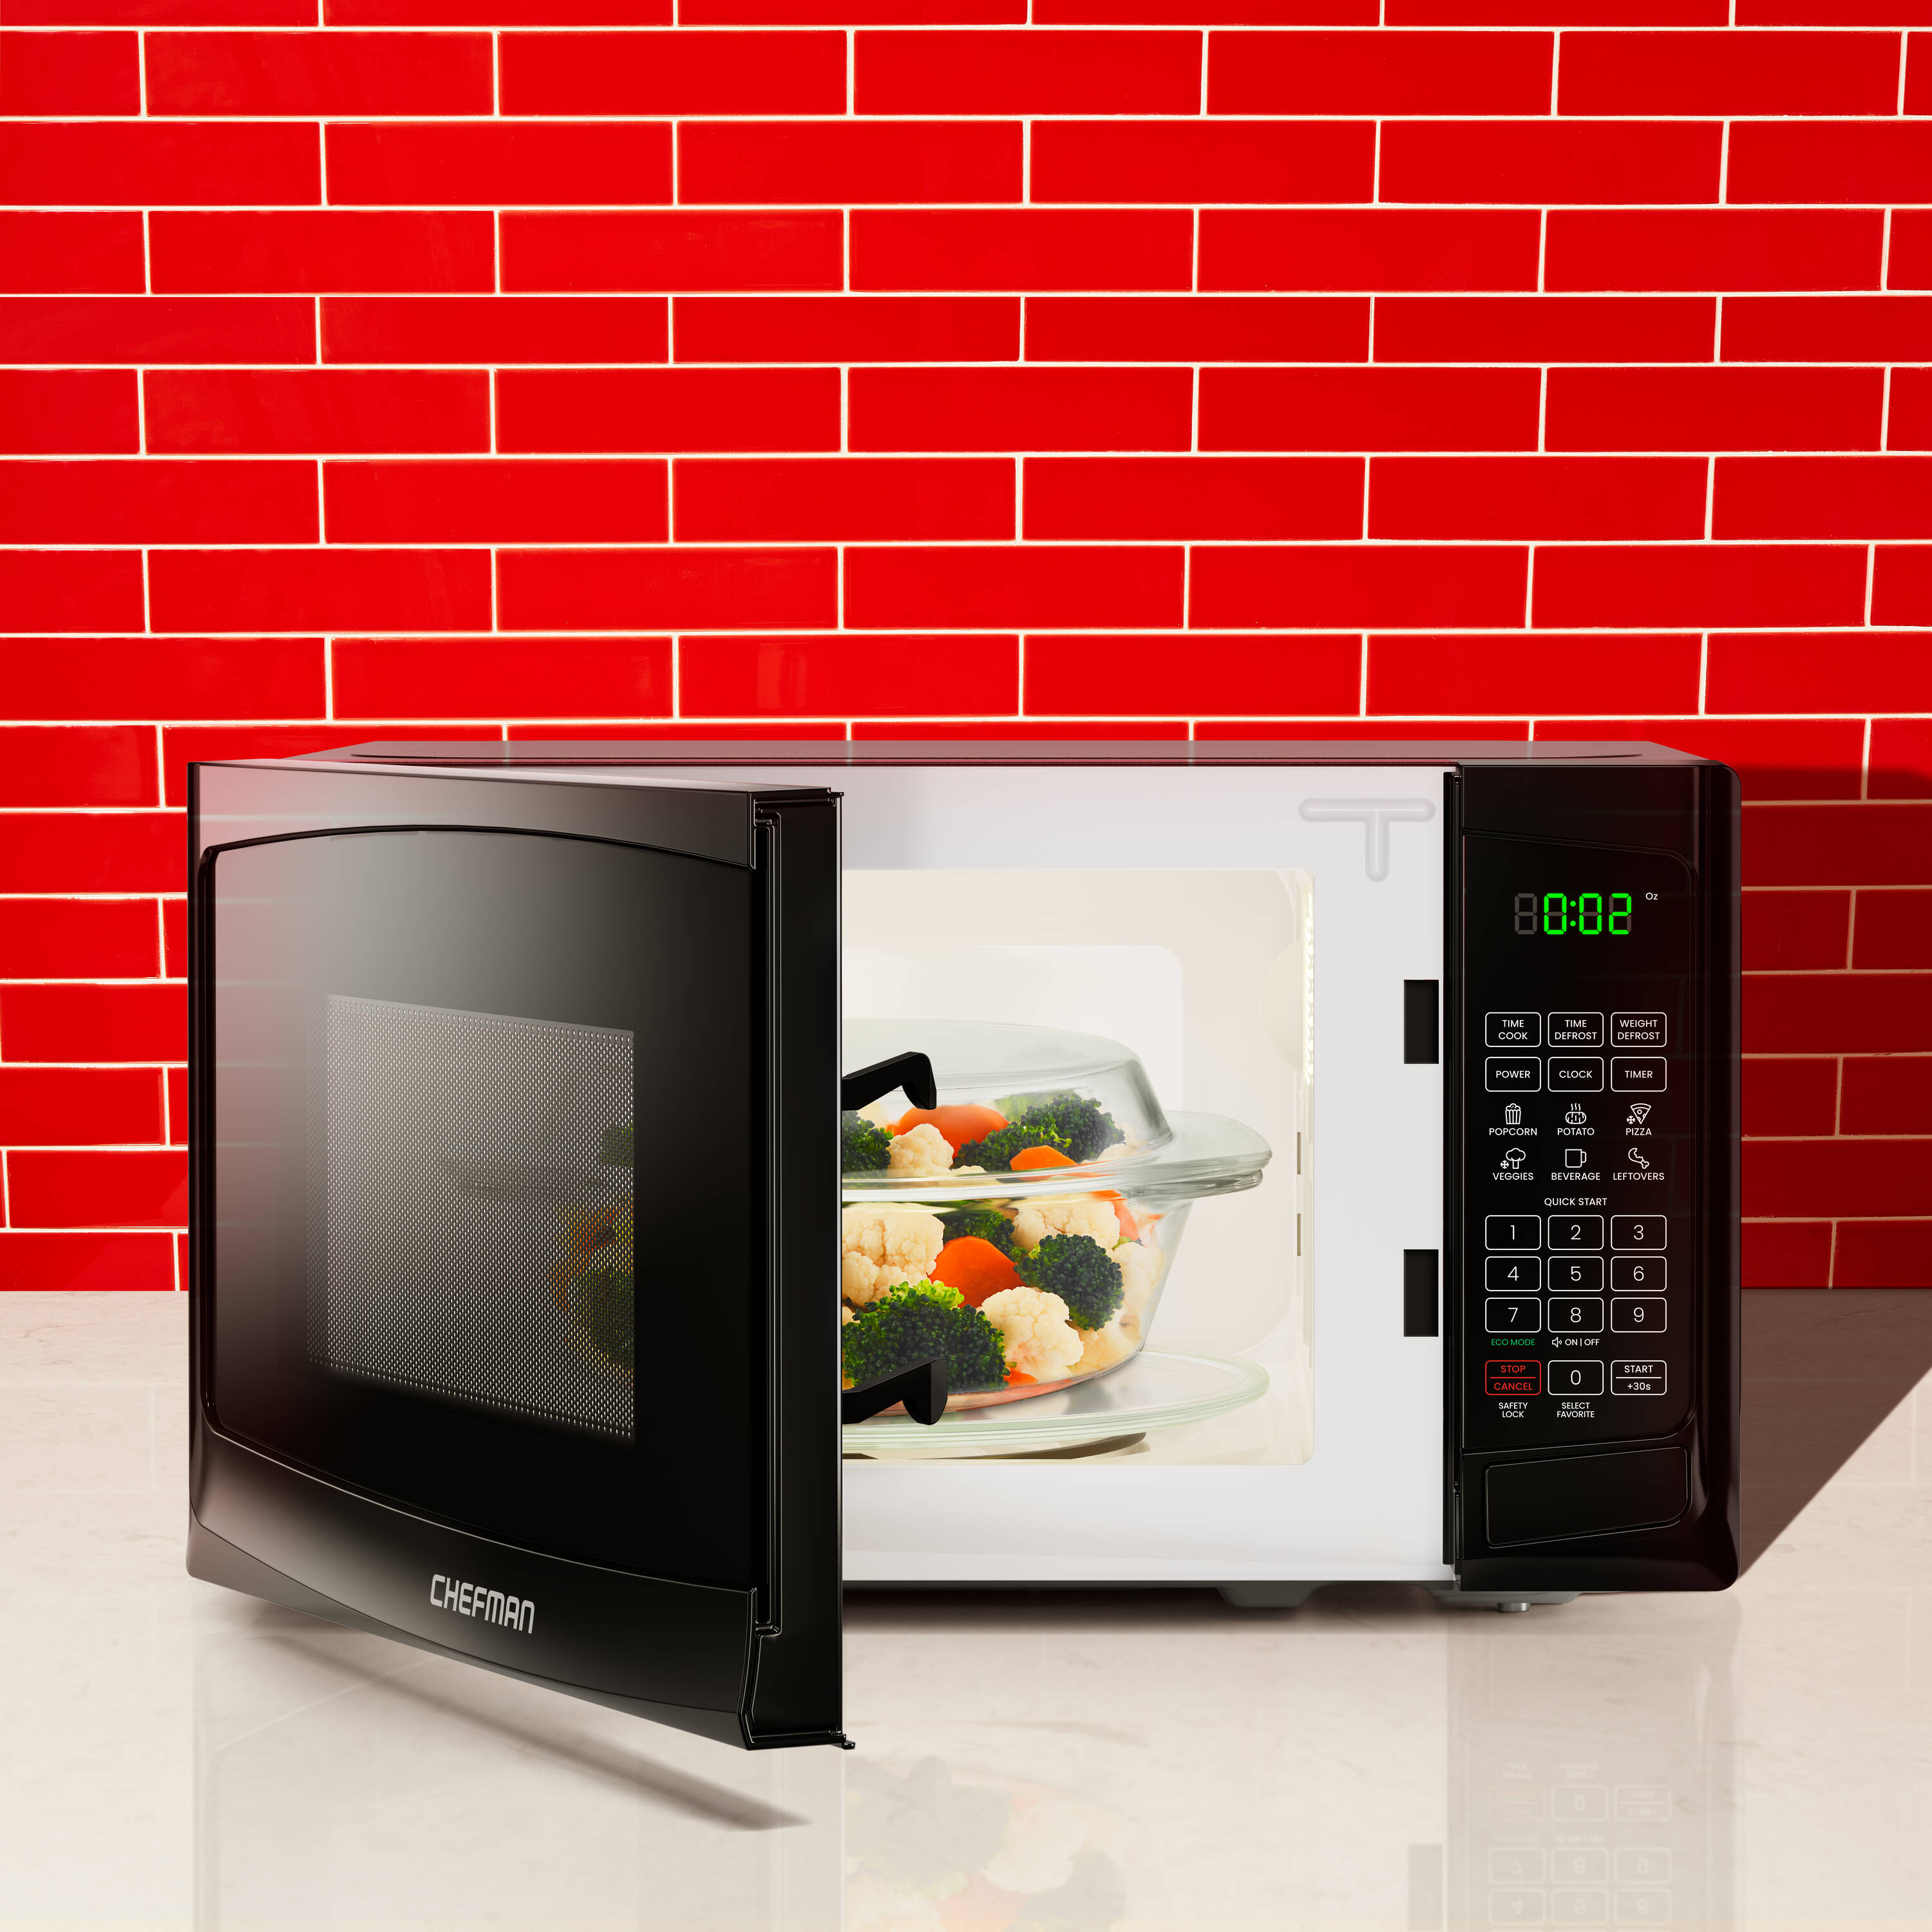 Chefman Countertop Microwave Oven 0.9 Cu. Ft. Digital Stainless Steel  Microwave 900 Watt with 6 Presets, Eco Mode, Mute Option, Memory Function,  Child